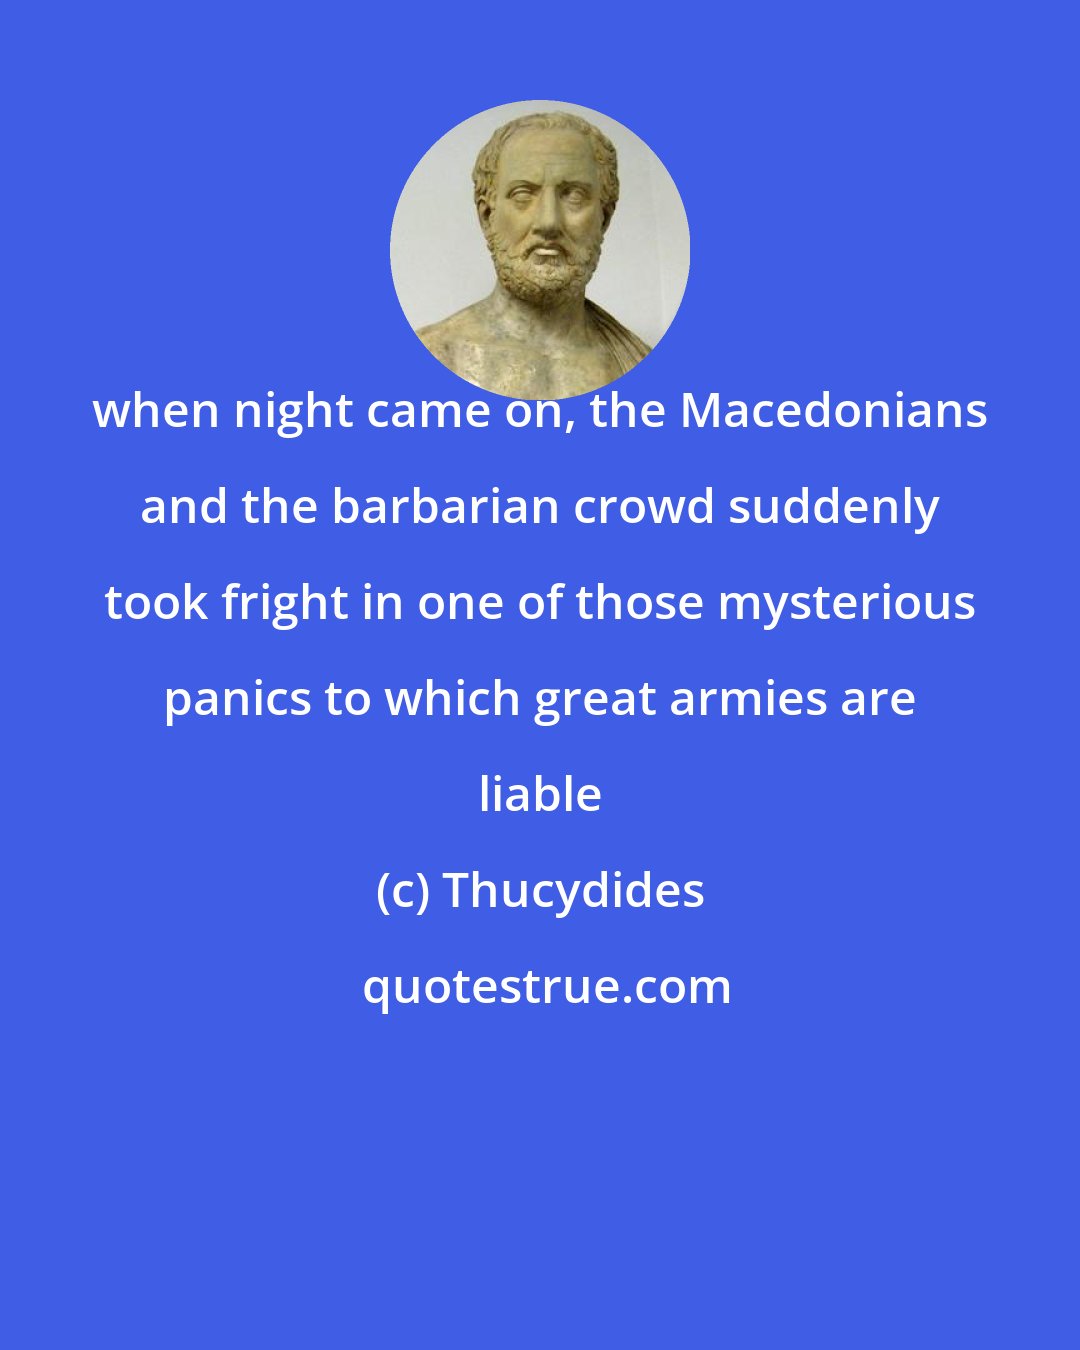 Thucydides: when night came on, the Macedonians and the barbarian crowd suddenly took fright in one of those mysterious panics to which great armies are liable